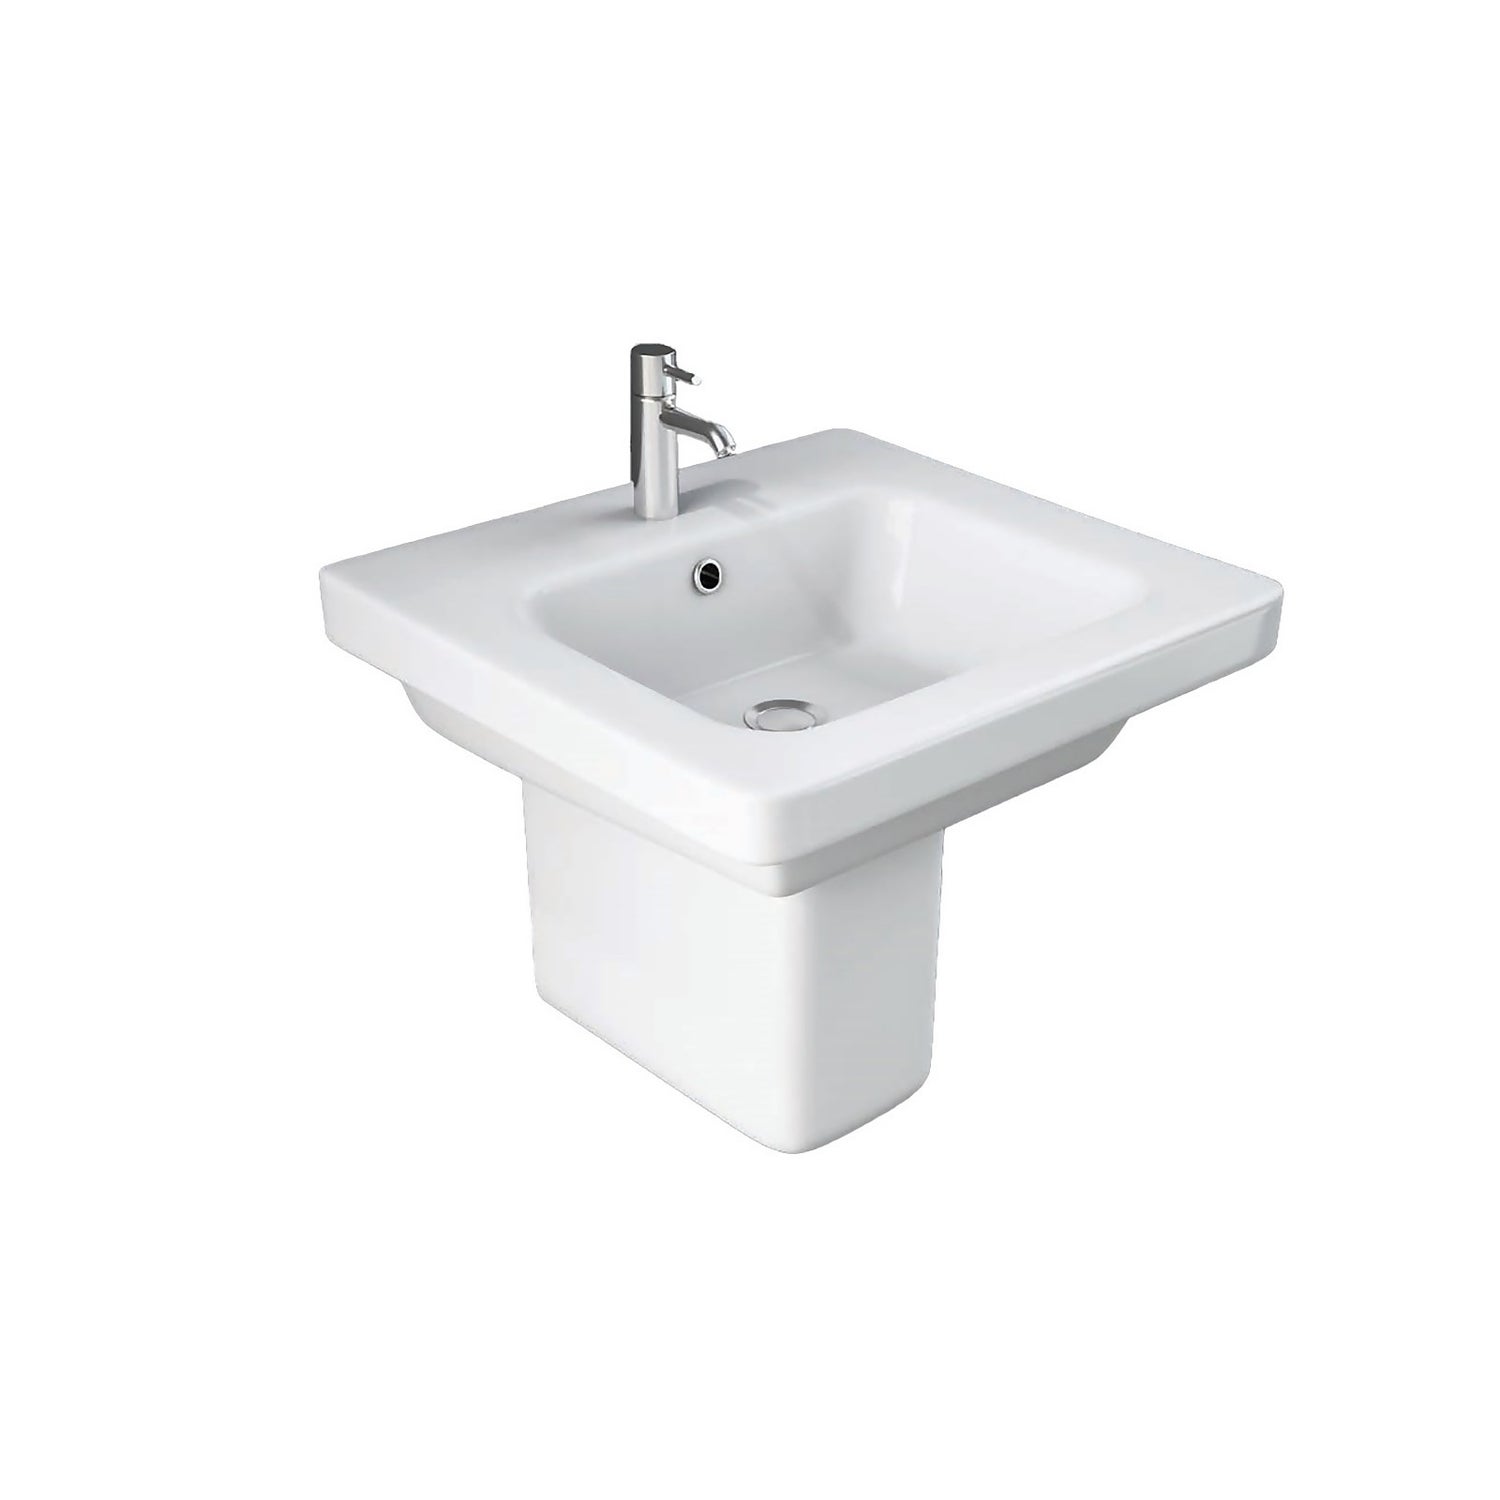 Falcon 500mm White Basin and Semi Pedestal with 1 Tap Hole